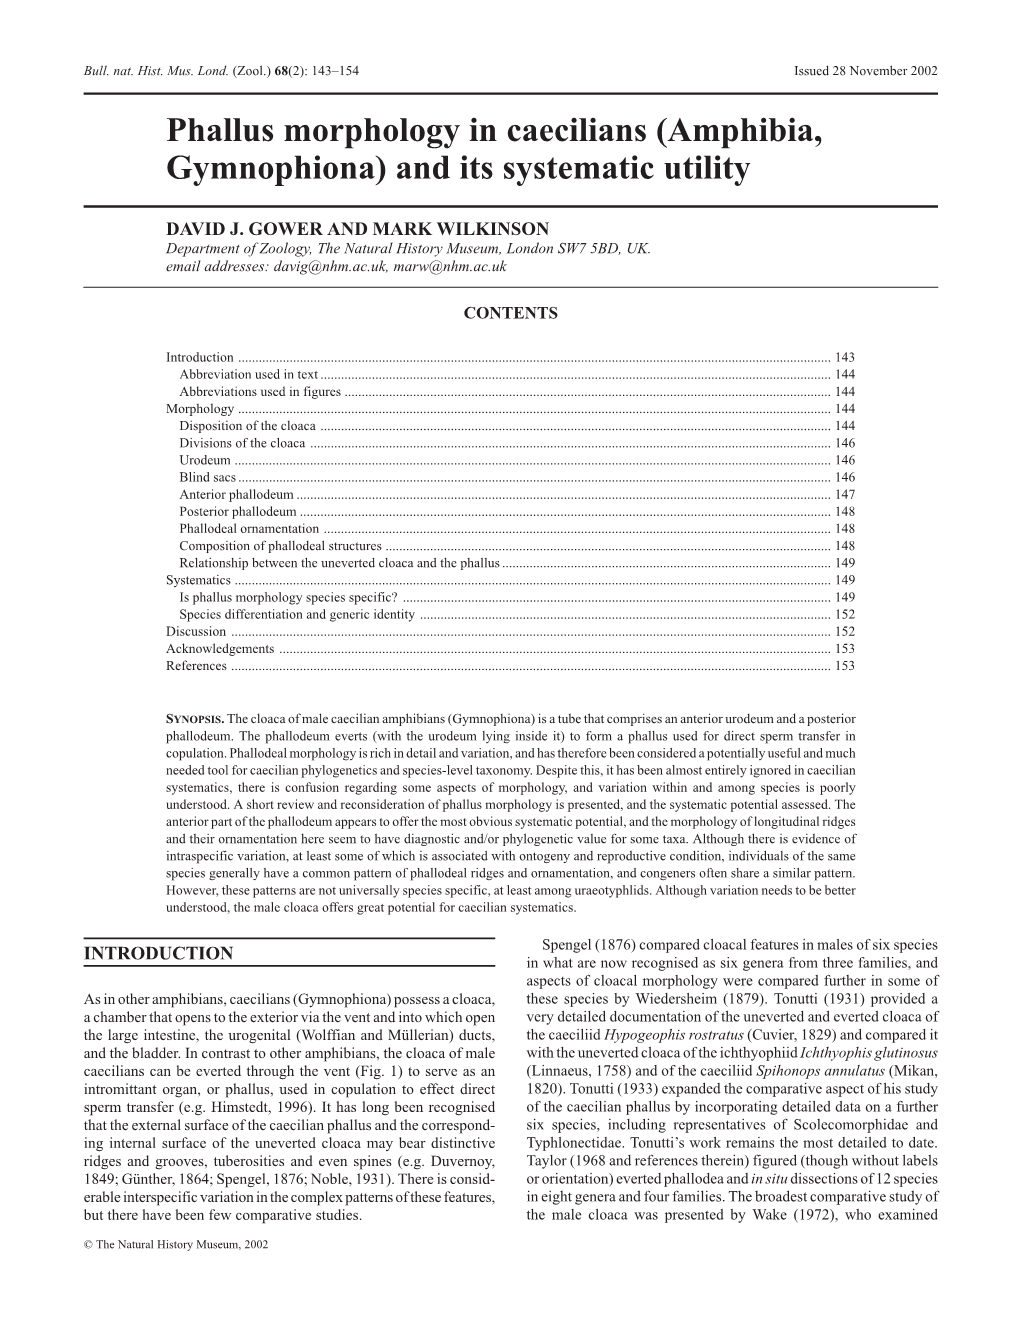 Phallus Morphology in Caecilians (Amphibia, Gymnophiona) and Its Systematic Utility